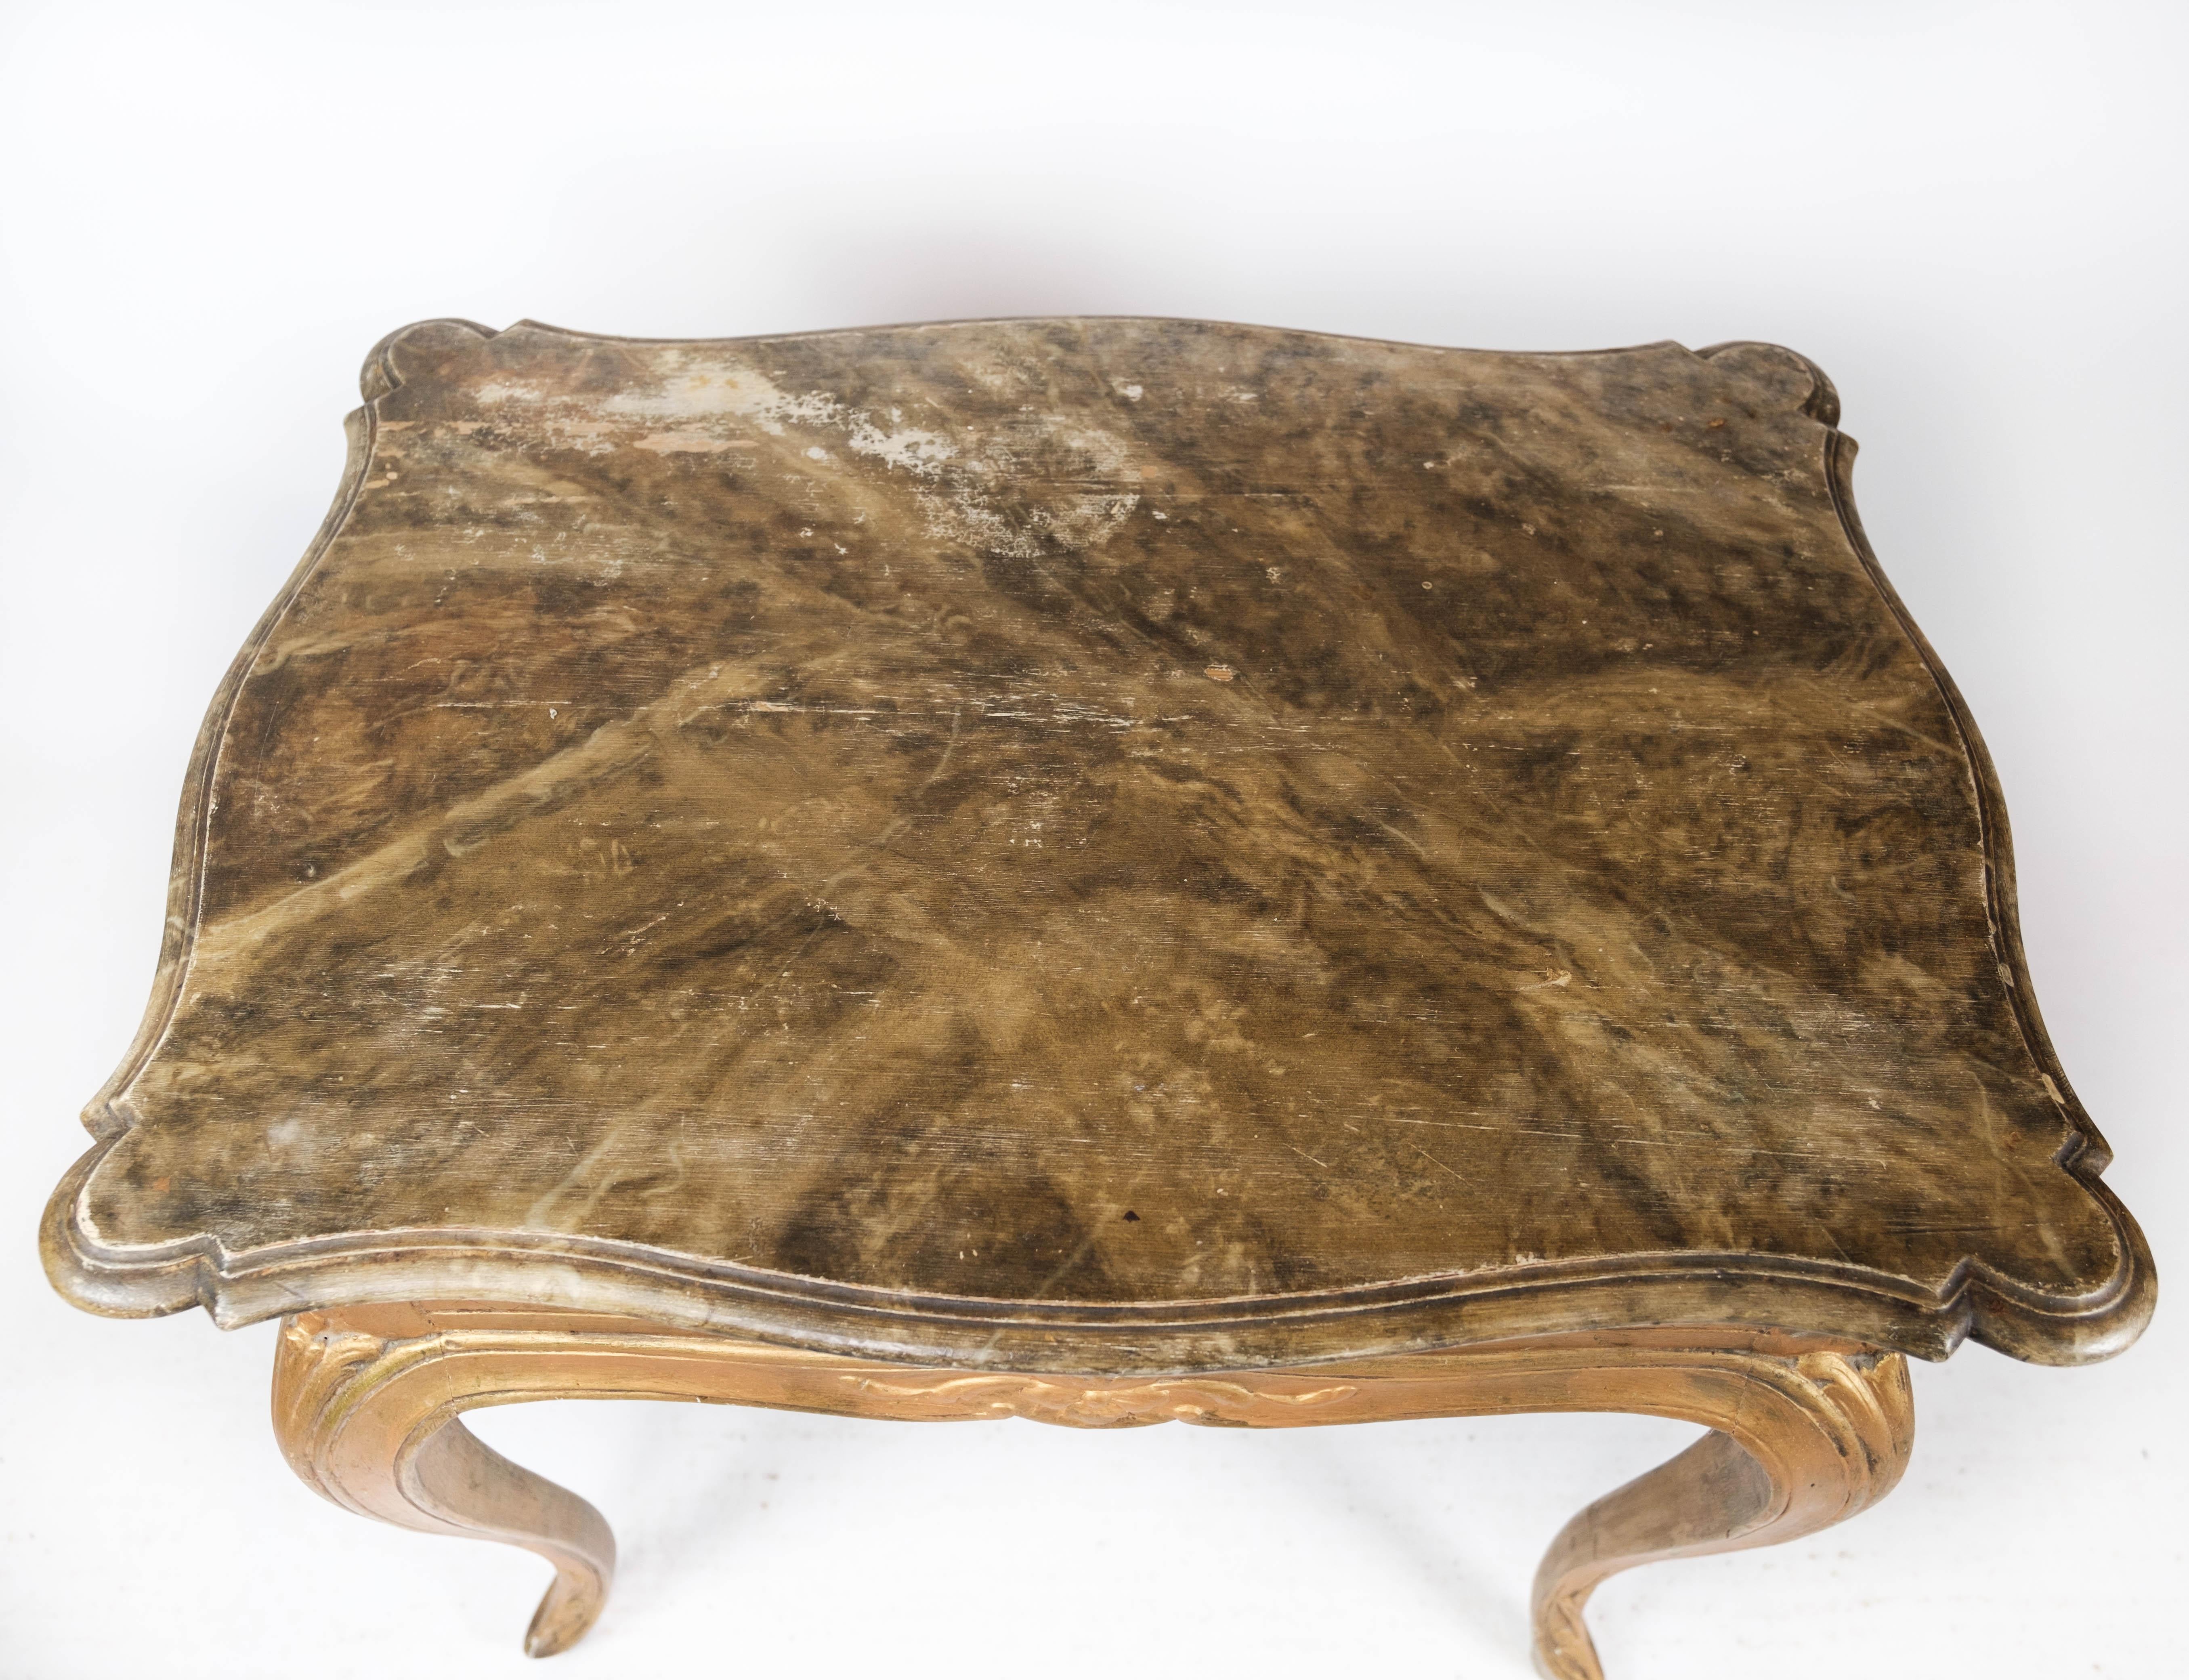 Gilt Rococo Revival Side Table with Marbled Tabletop and Frame of Gilded Wood, 1860s For Sale